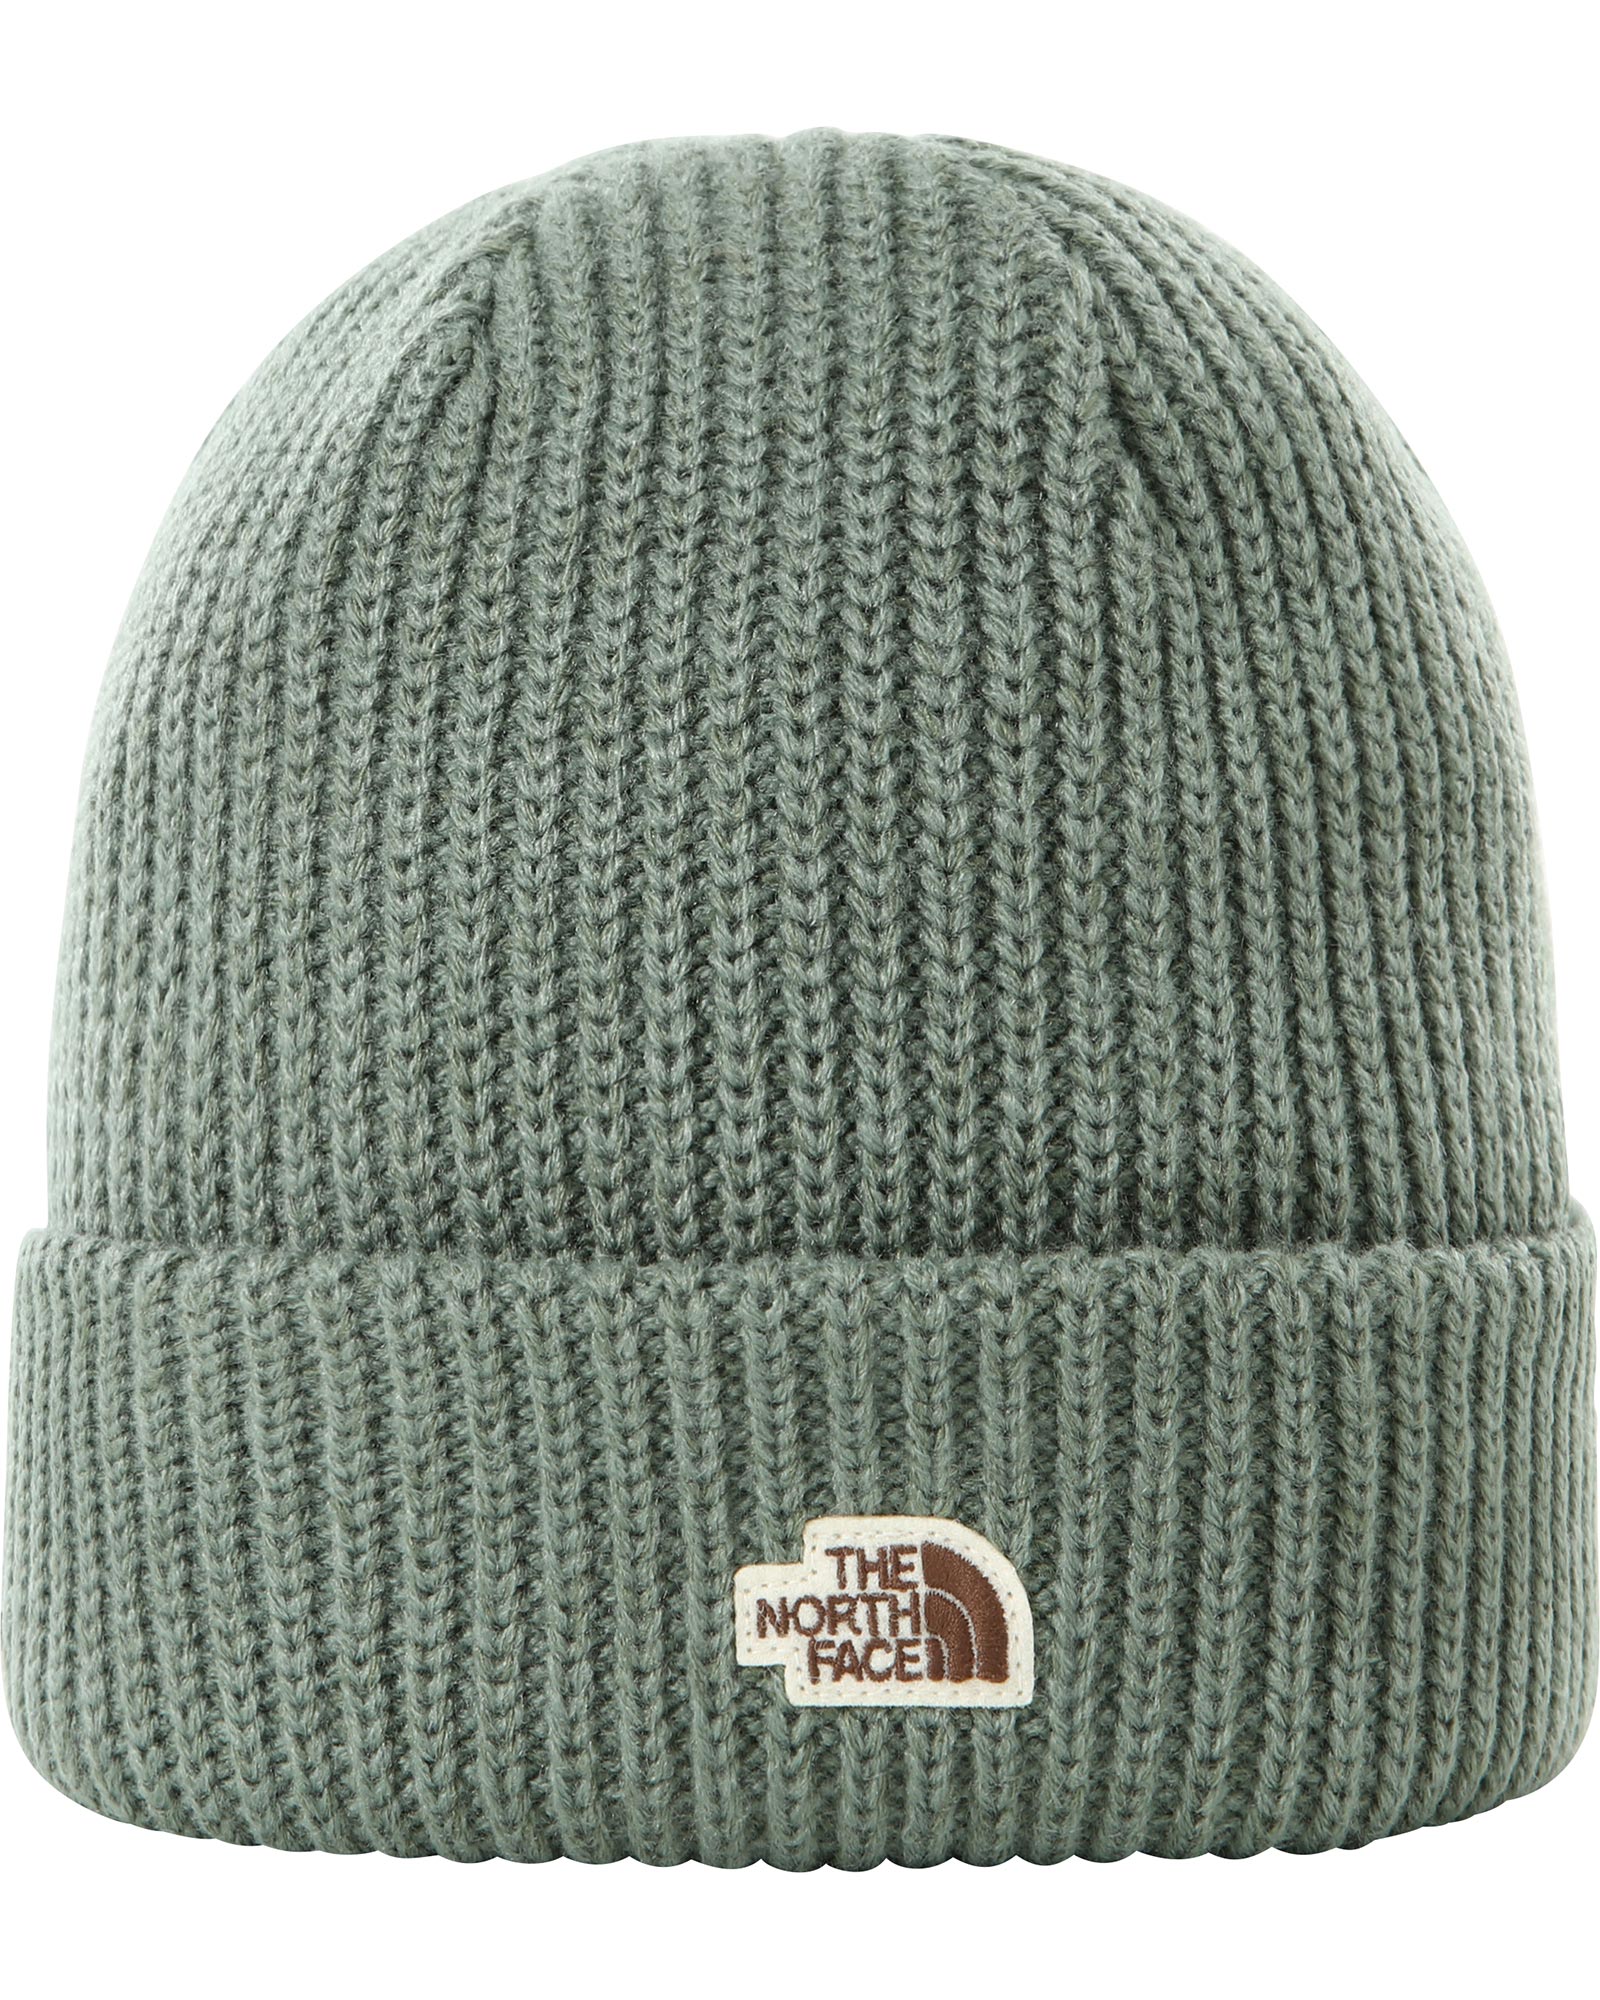 The North Face Salty Lined Beanie - Dark Sage